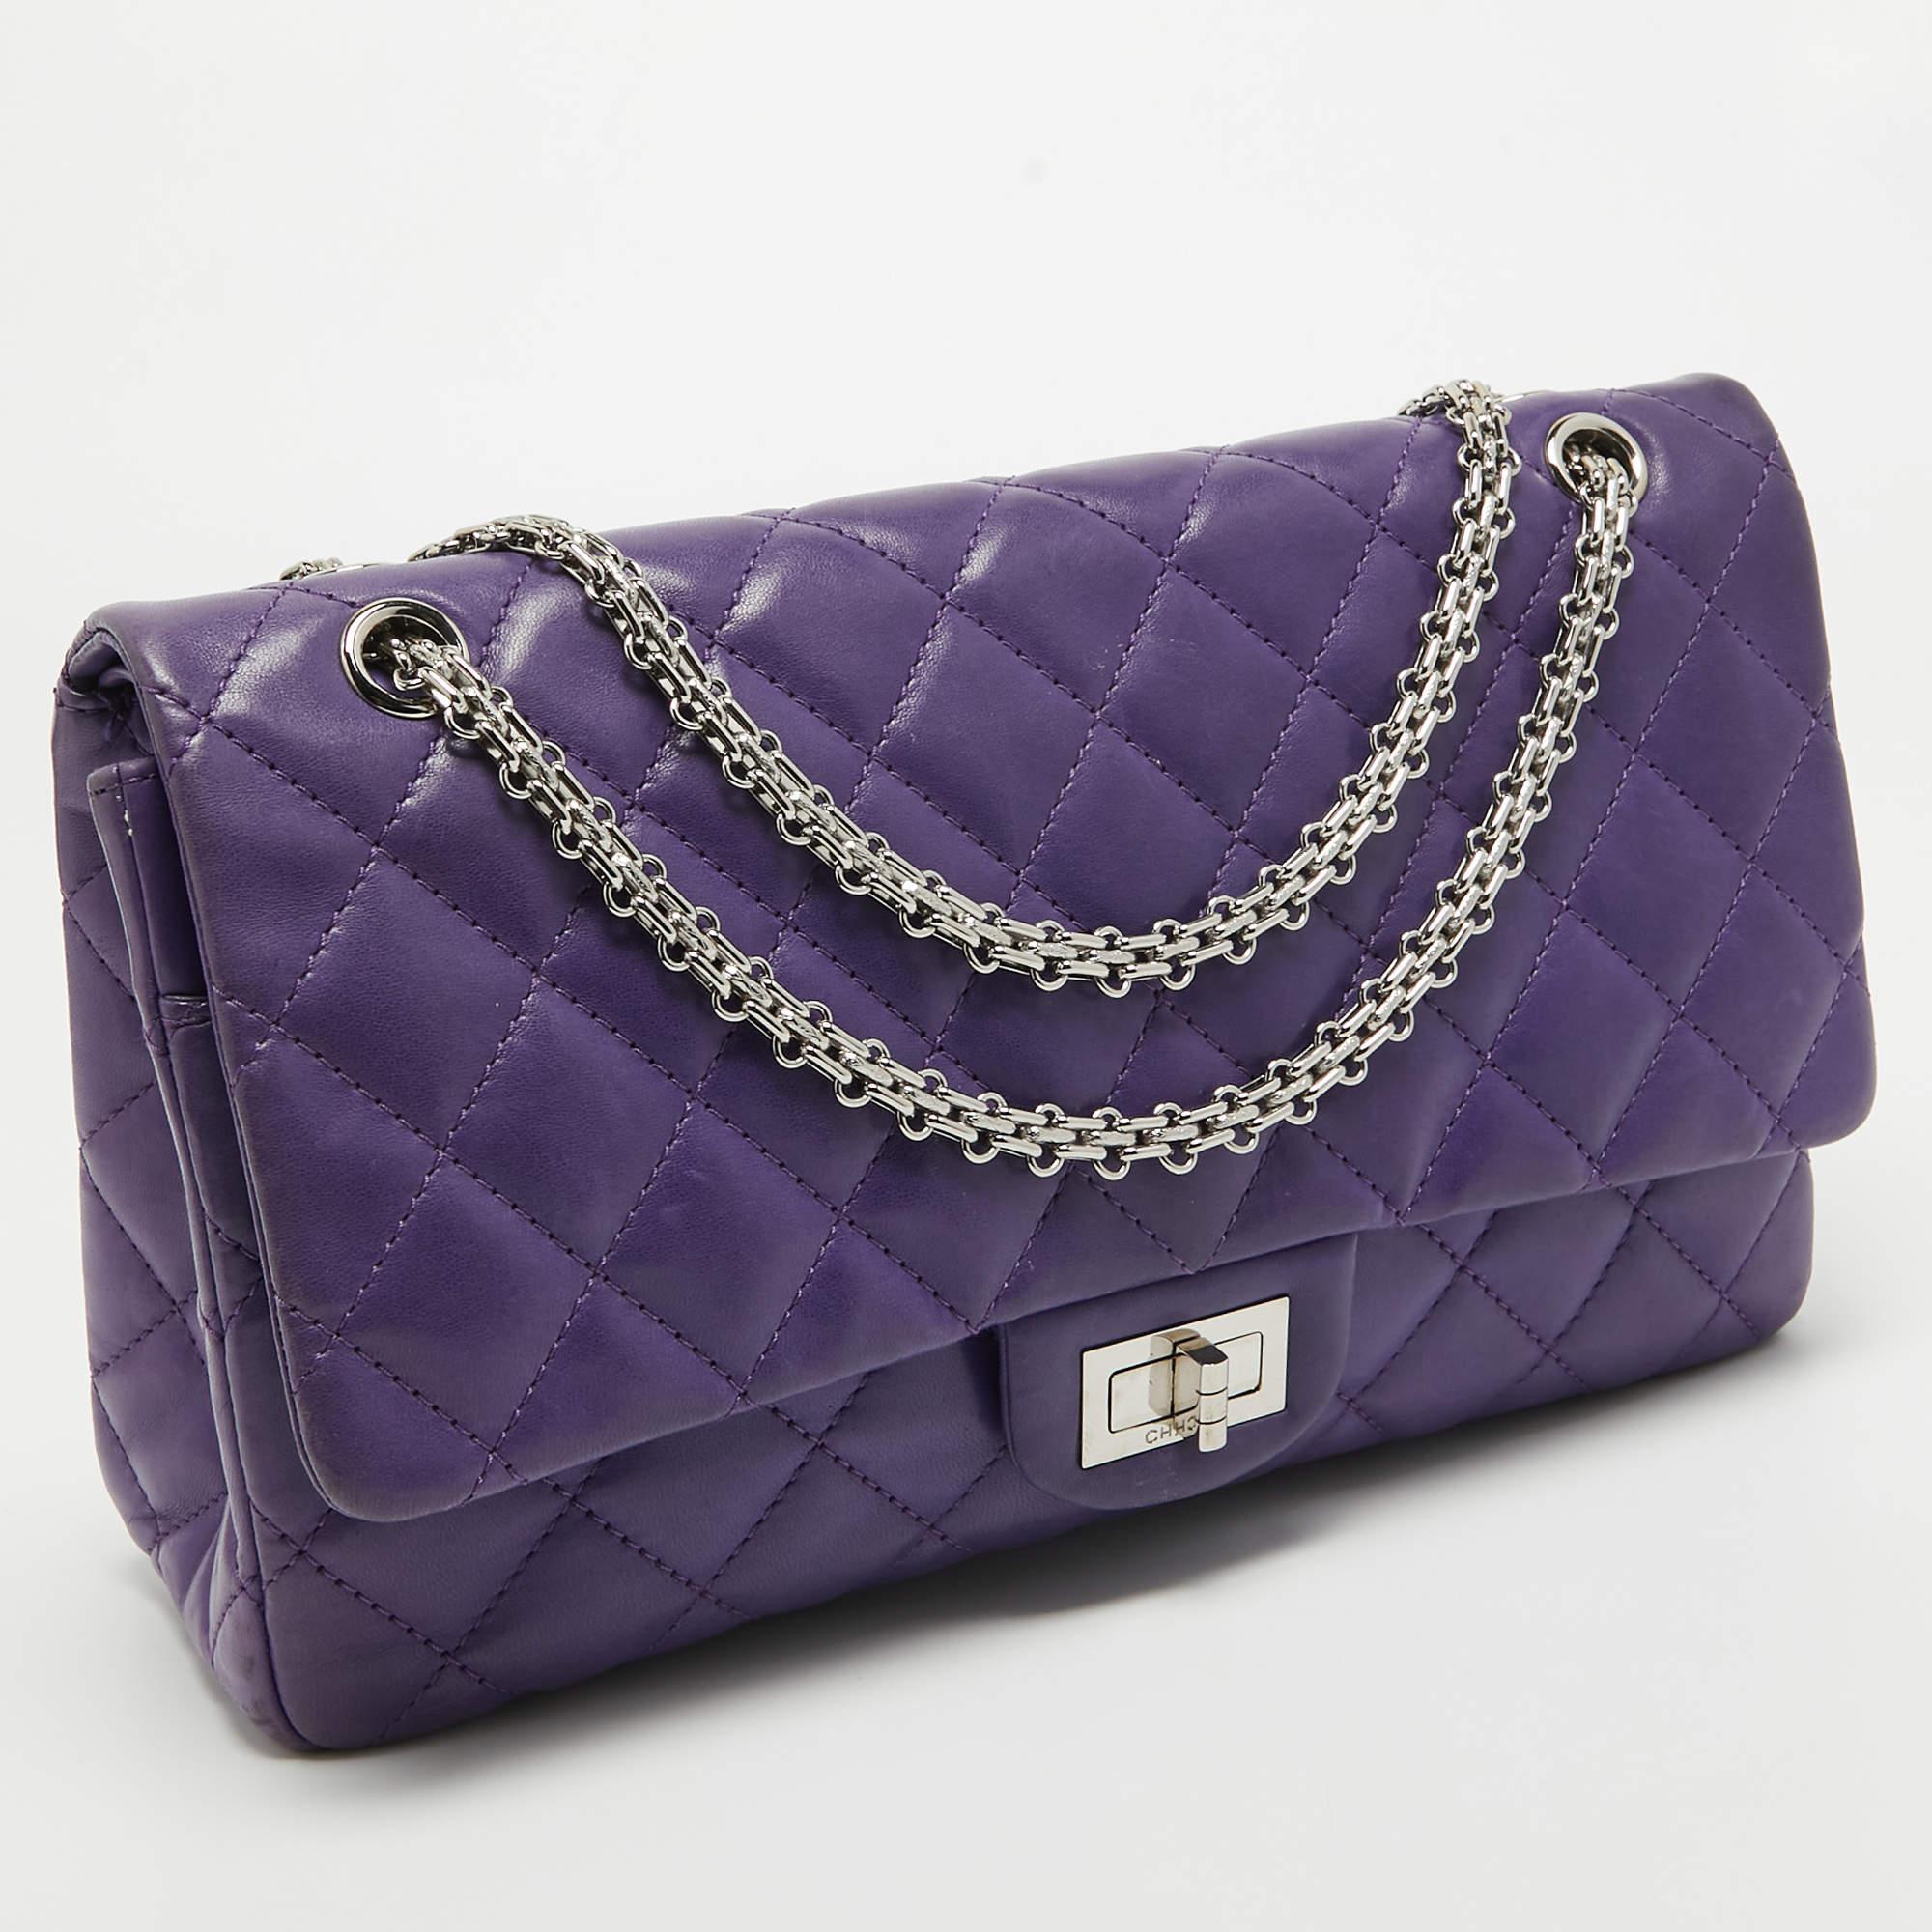 Women's Chanel Purple Quilted Leather 227 Reissue 2.55 Flap Bag For Sale